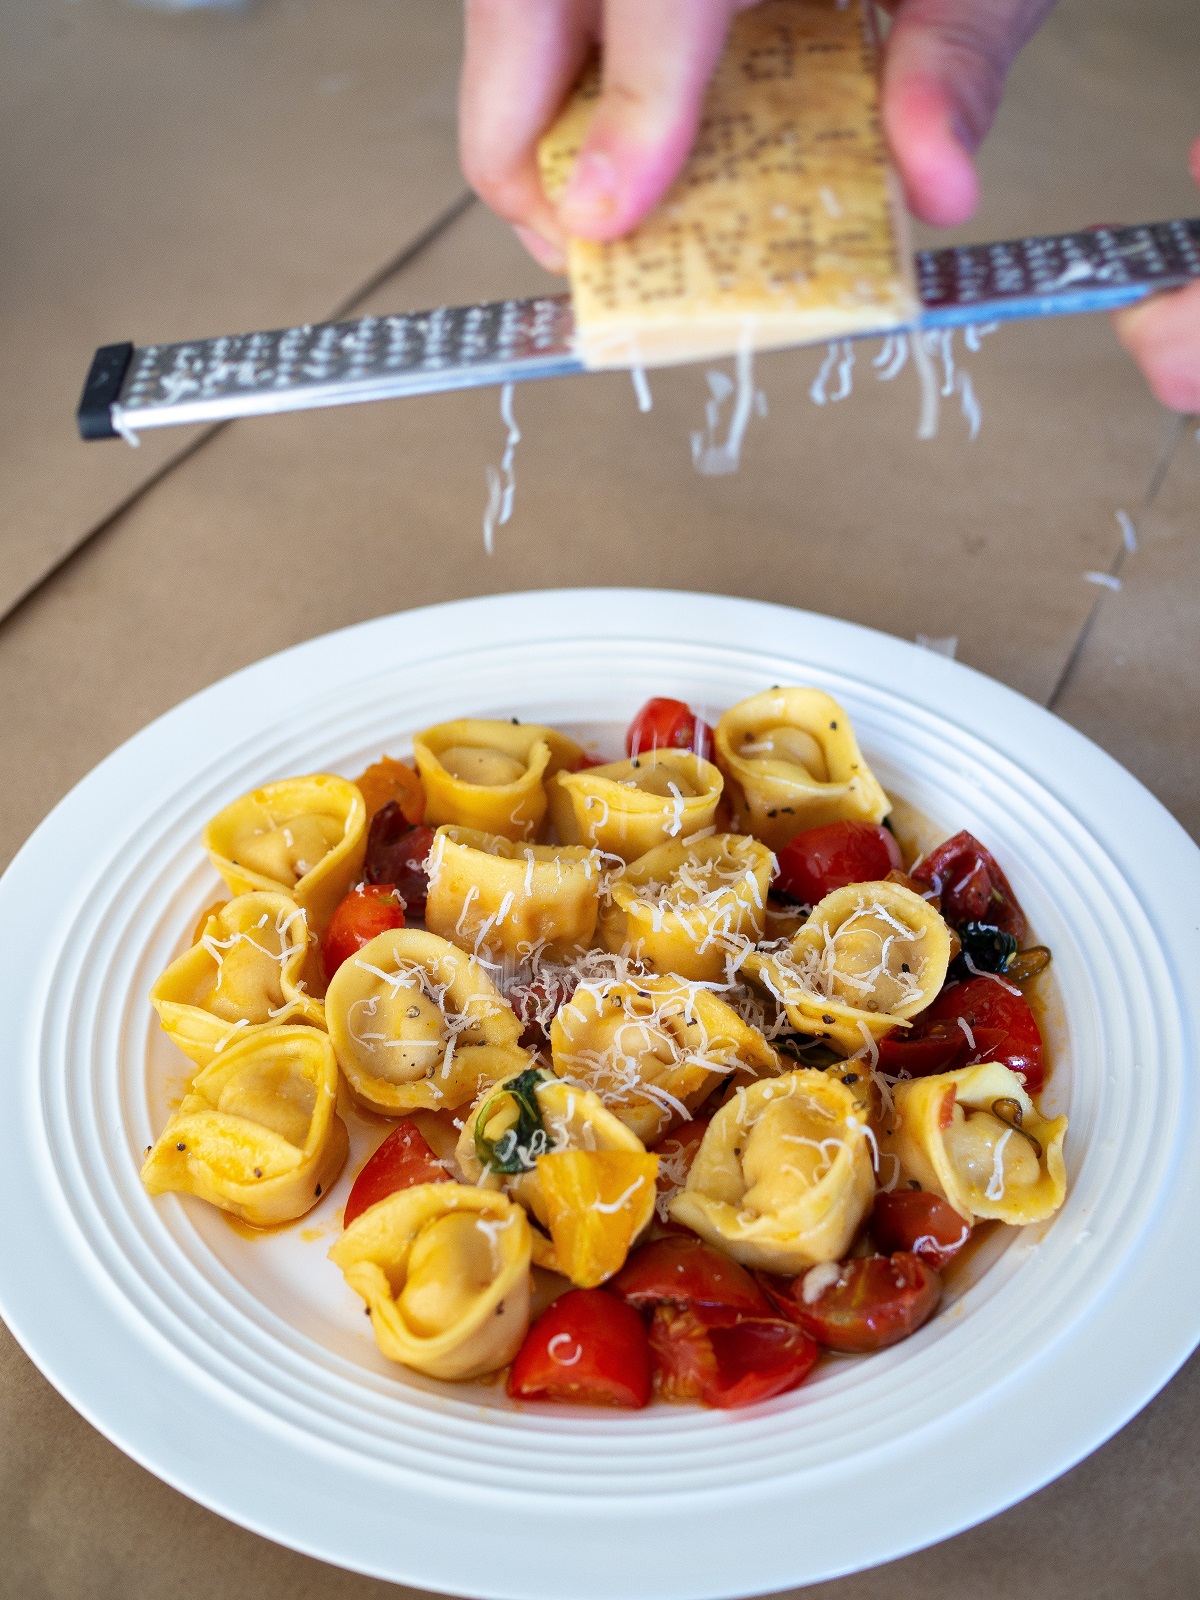 Plate of tortellini with tomatoes and herbs with fresh cheese grated on top